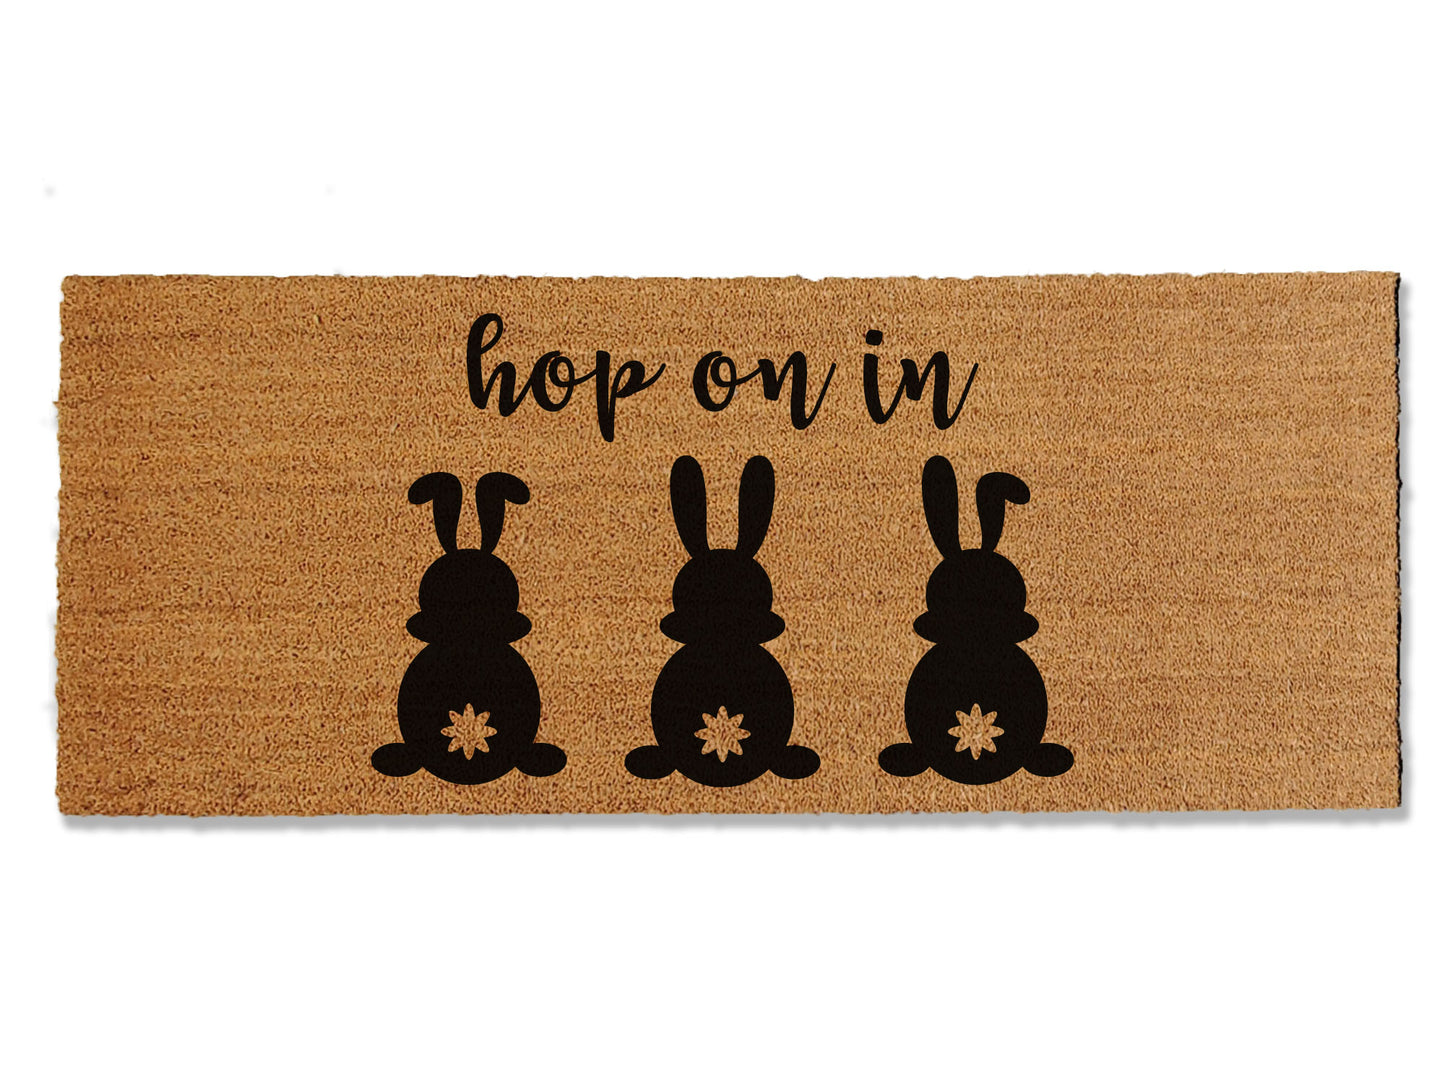 Welcome guests with our festive seasonal coir doormat, saying 'Hop on In' and featuring three adorable bunnies. The perfect way to greet guests this Easter, this mat not only adds a touch of holiday cheer but also excels at trapping dirt to keep it from entering your home.